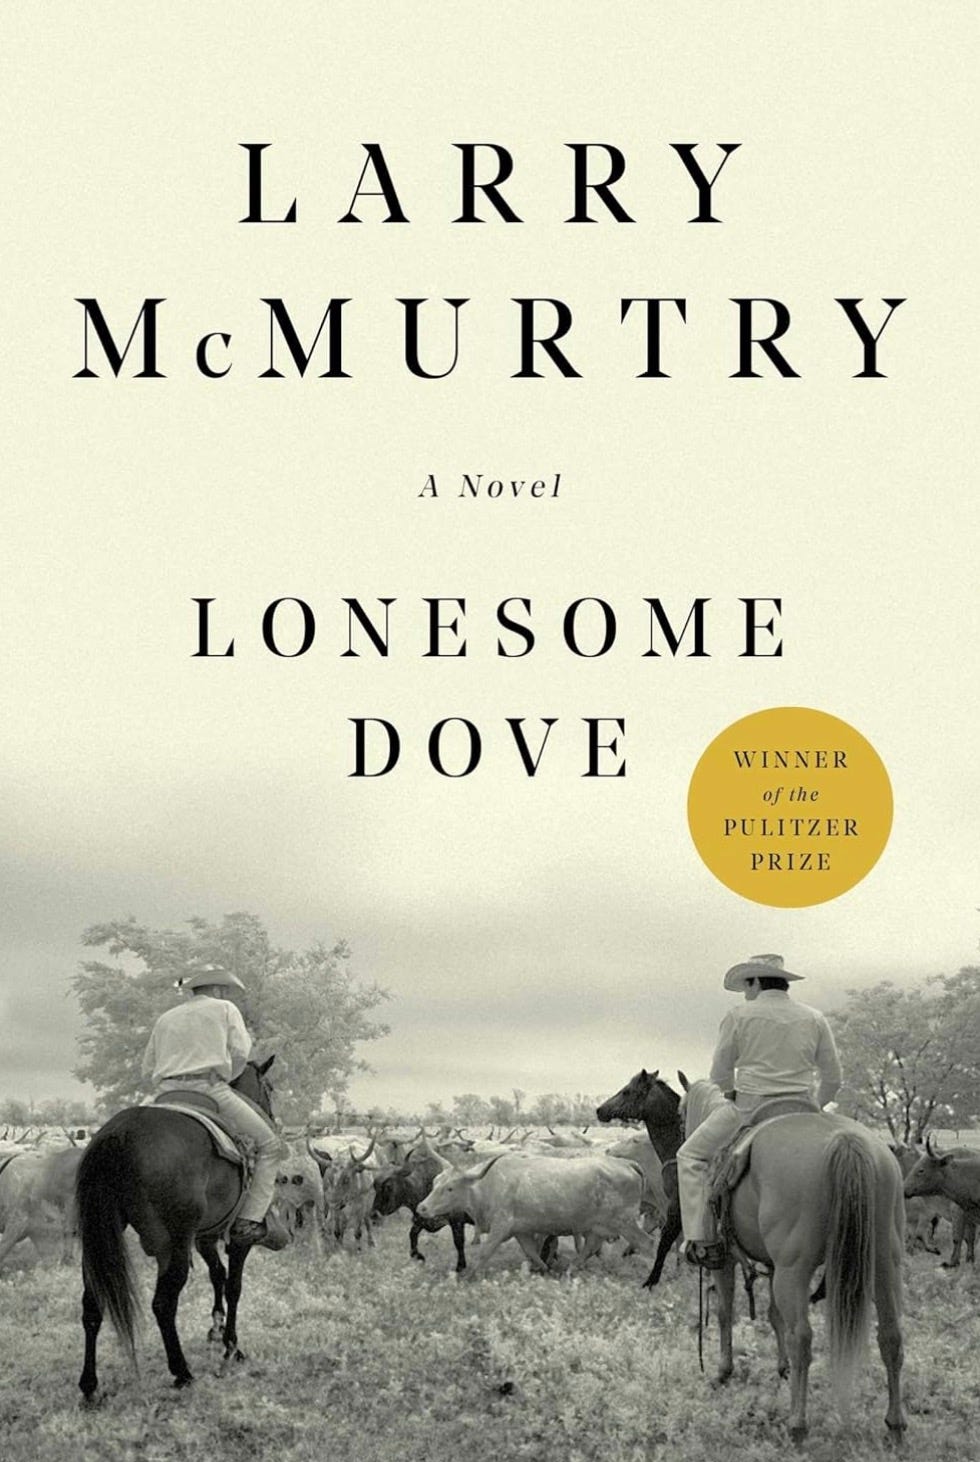 Larry McMurtry’s Lonesome Dove.